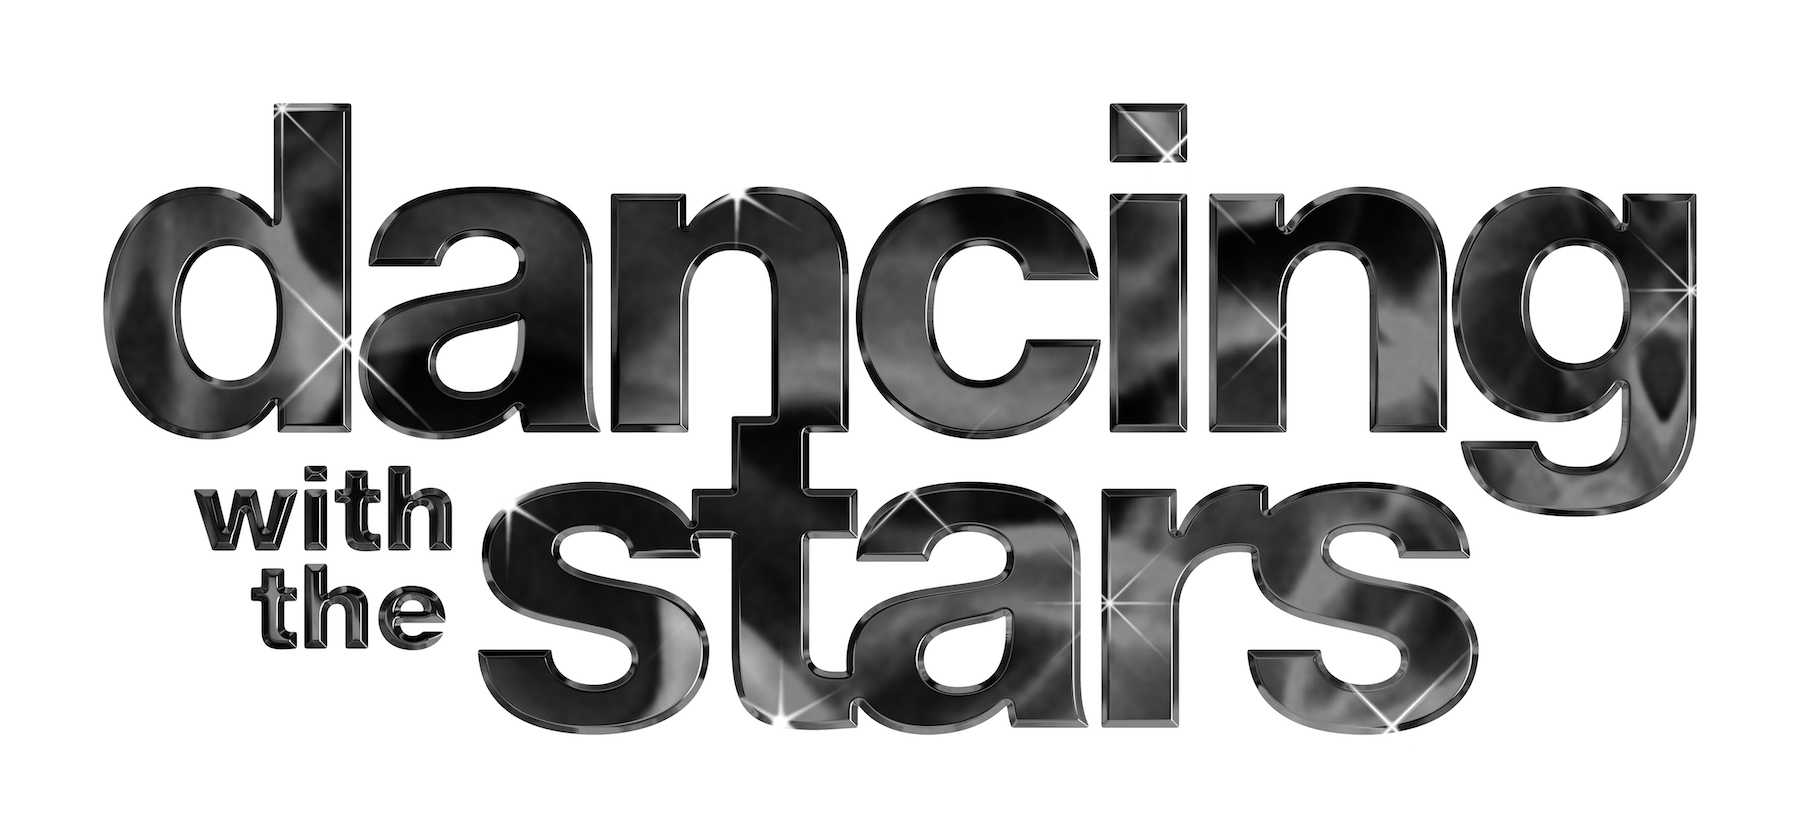 `Dancing with the Stars` image courtesy of Disney Media & Entertainment Distribution.